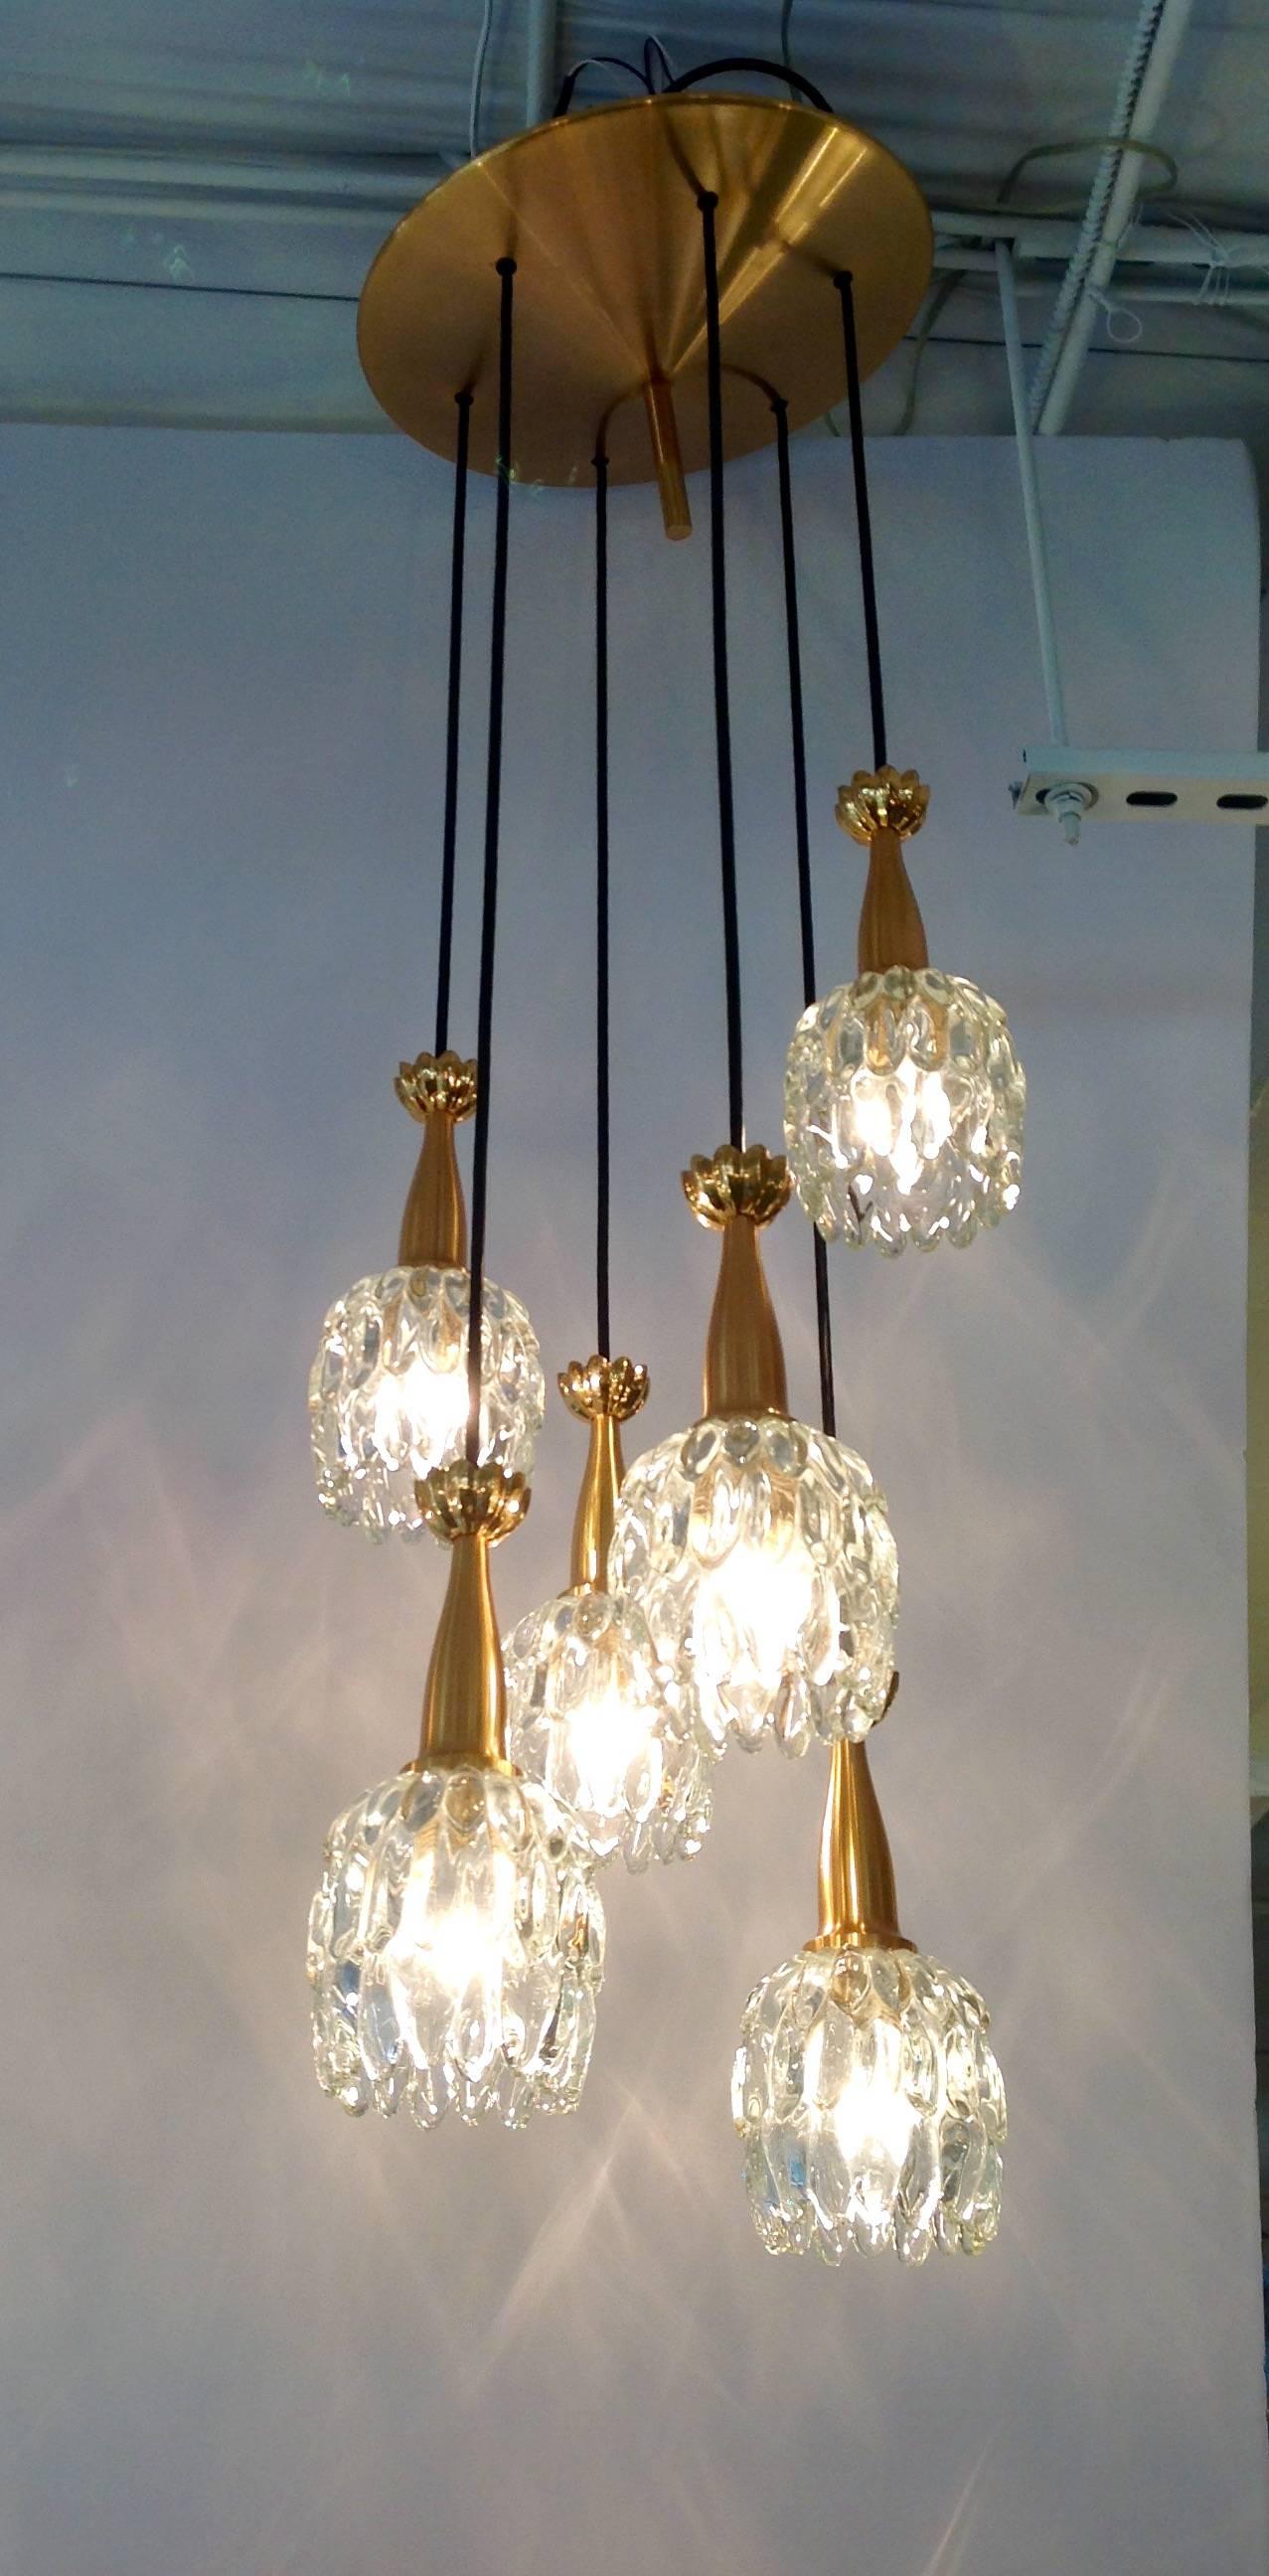 Vintage Kalmar six-light chandelier with adjustable height. The six tulip shaped globes with gold plated brass fittings are on adjustable cable attached to a gold plated disc top. Made in Austria in the 1960s.